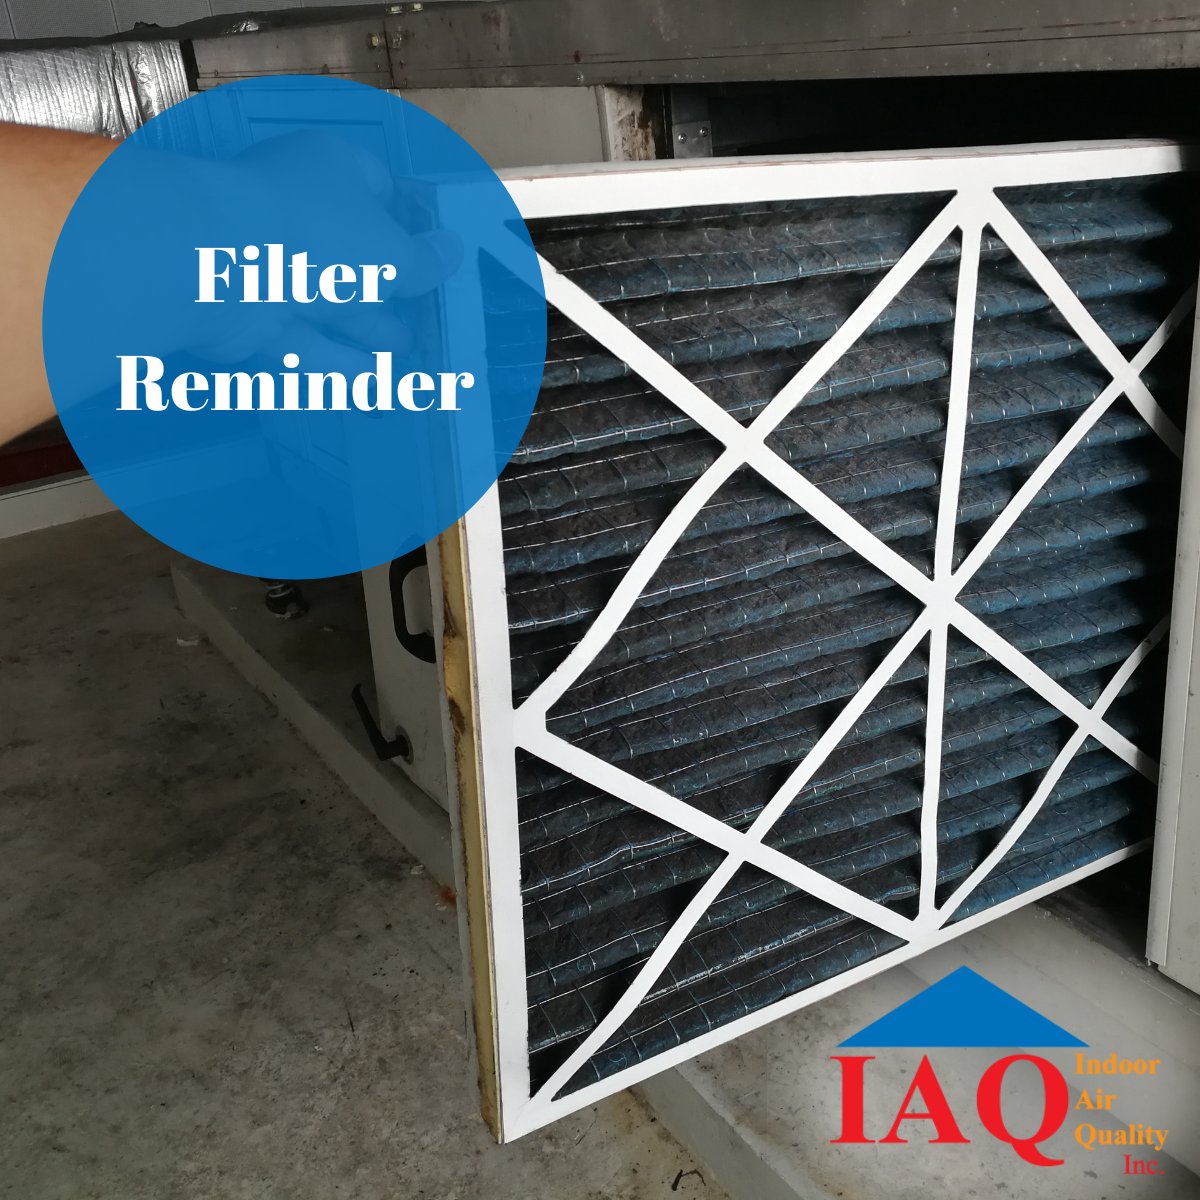 Regular filter changes prevent undue strain on your unit, leading to prolonged system life and reduced energy consumption. Remember, an ounce of prevention is worth a pound of cure.

#AirFilter #AirFilters #AirFilterReplacement #AirFilterChange #FilterChange